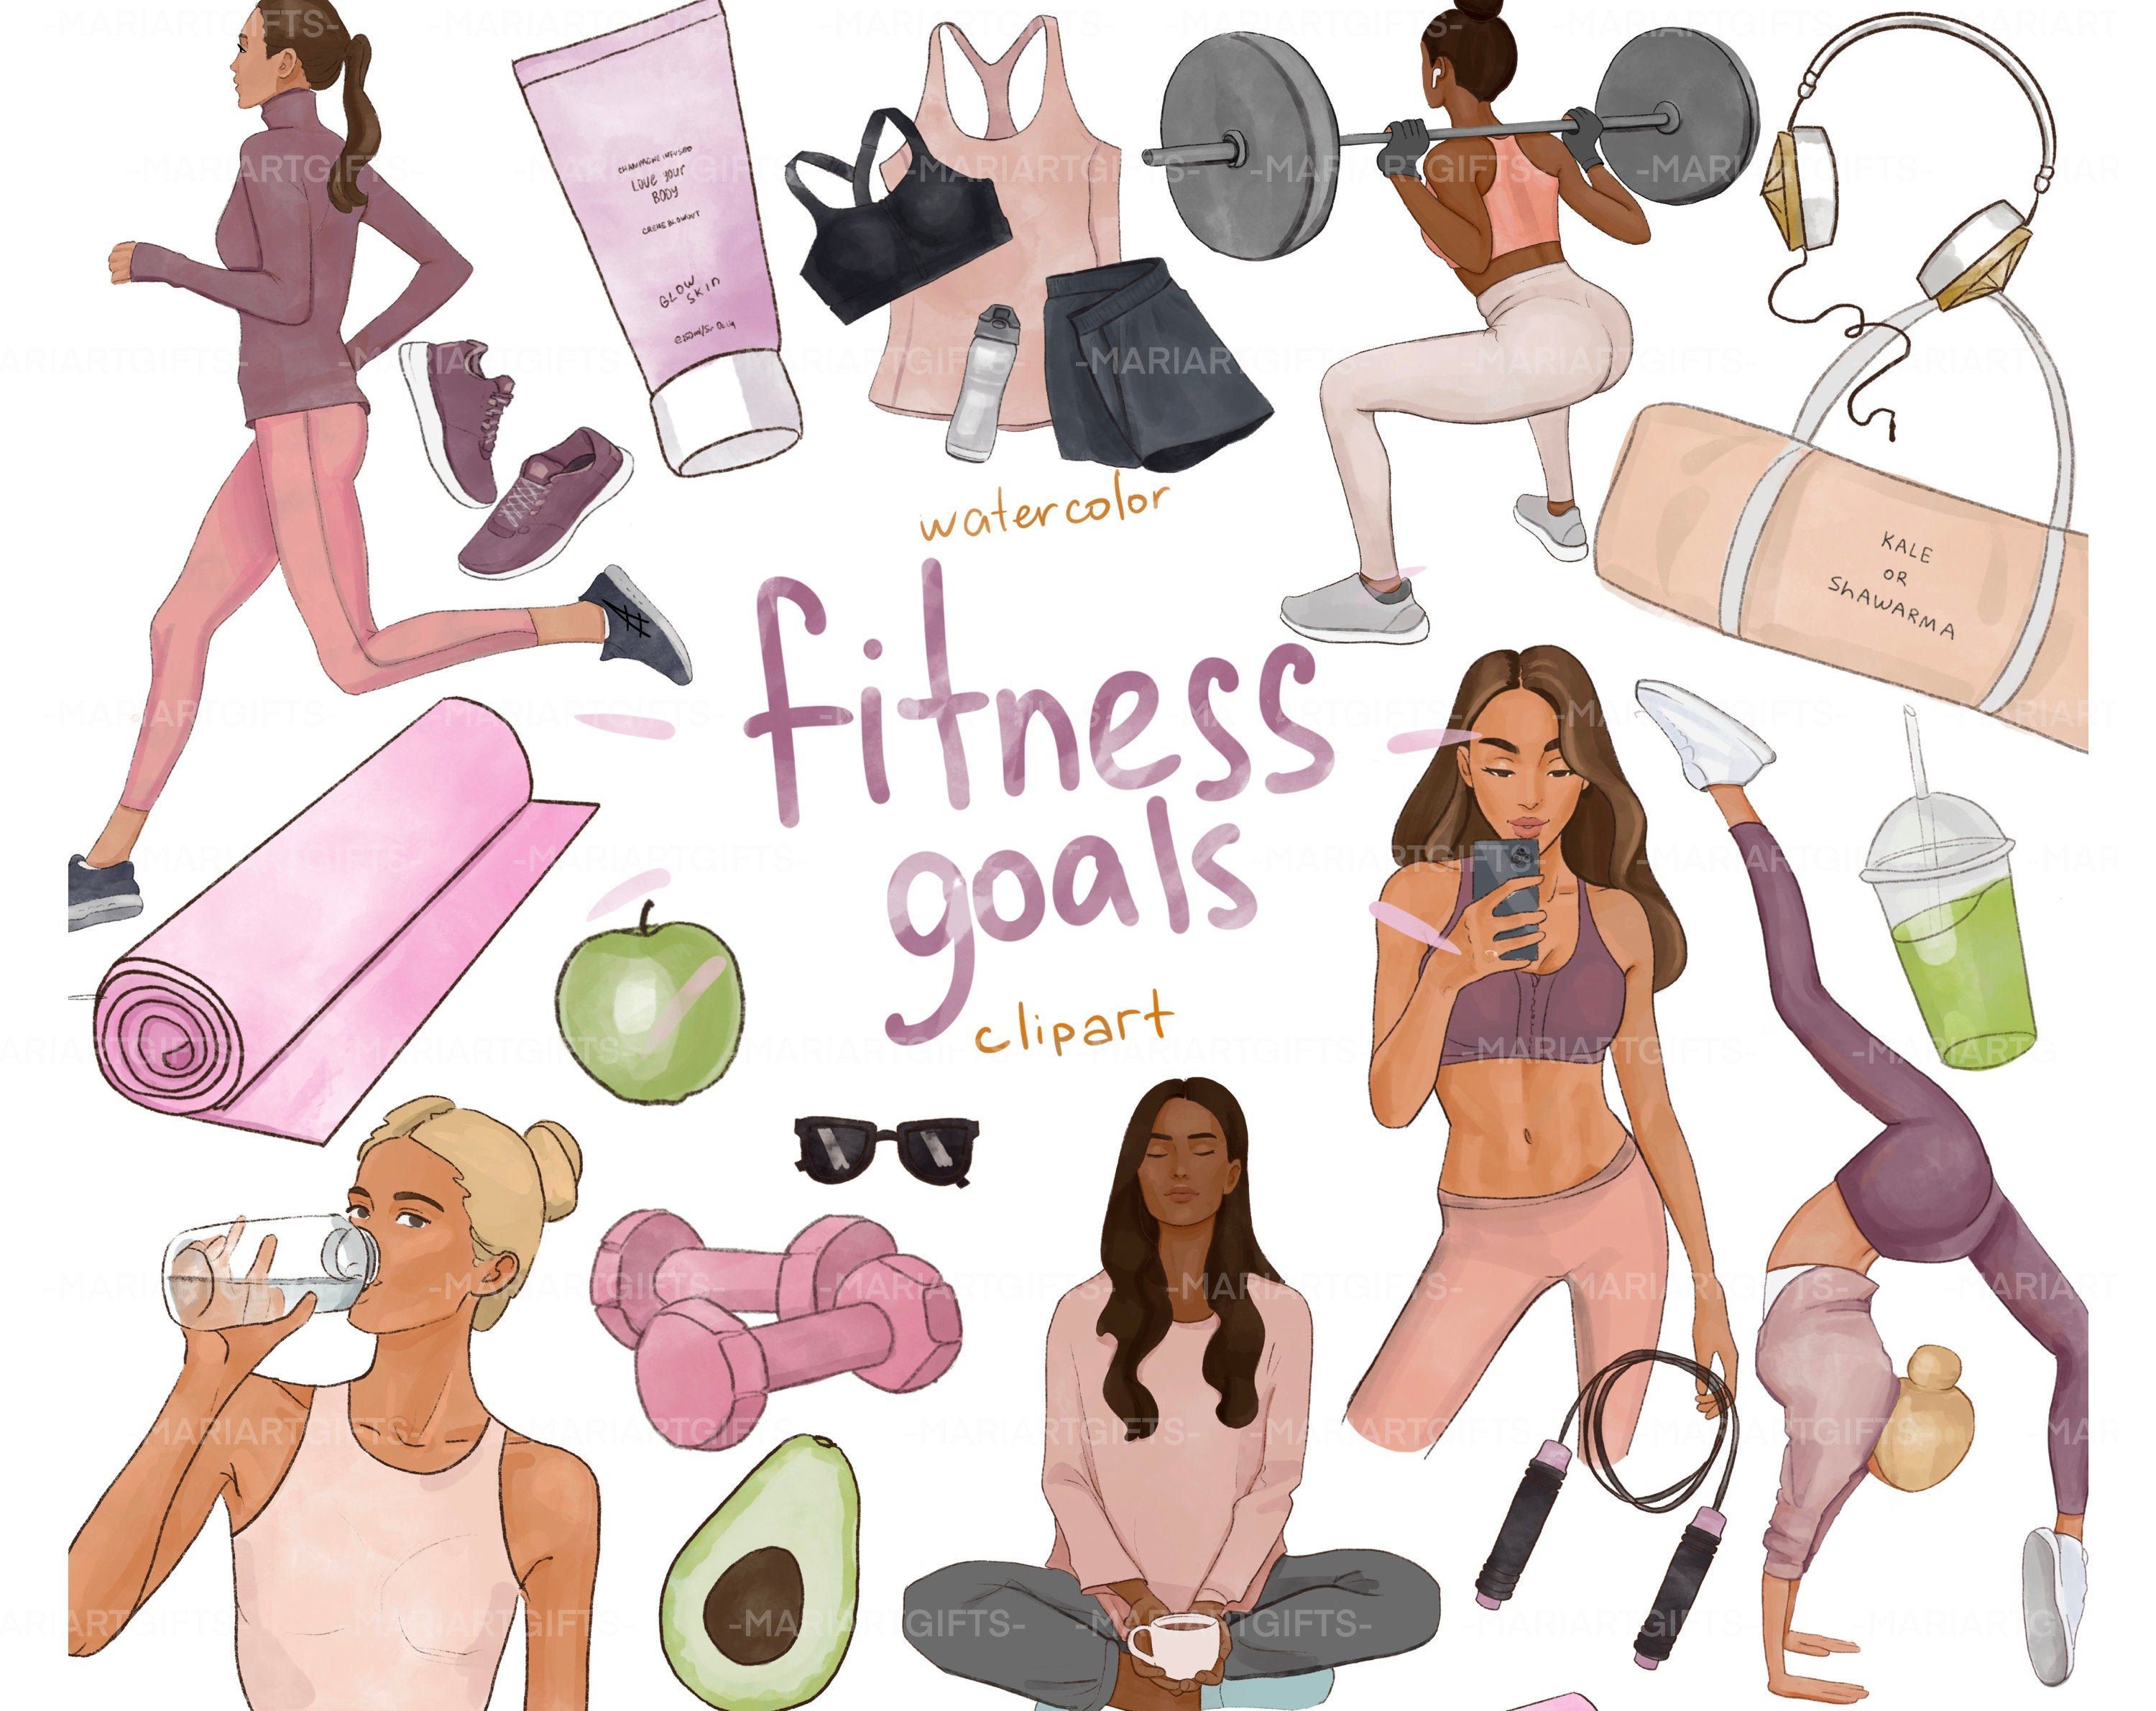 Fitness Clipart, Workout Clip Art, Yoga Clip Art, Fashion Illustration, Gym Equipment, gym clipart, fitness blogger, planner stickers - Fitness Clipart, Workout Clip Art, Yoga Clip Art, Fashion Illustration, Gym Equipment, gym clipart, fitness blogger, planner stickers -   13 fitness Illustration girl ideas